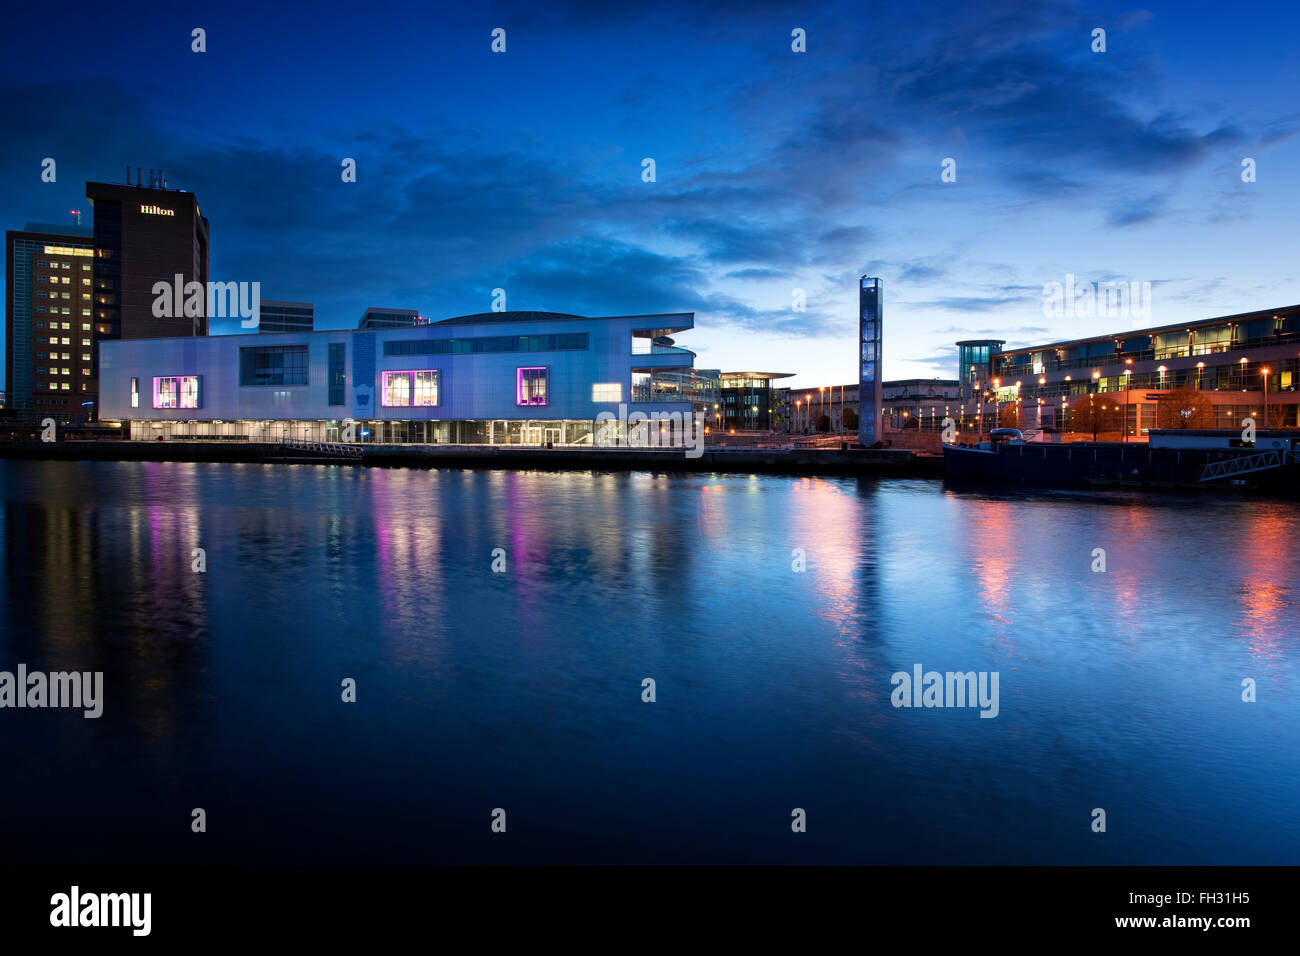 Nuovo Waterfront Hall Conference Centre a Lananside Belfast Irlanda del Nord Foto Stock